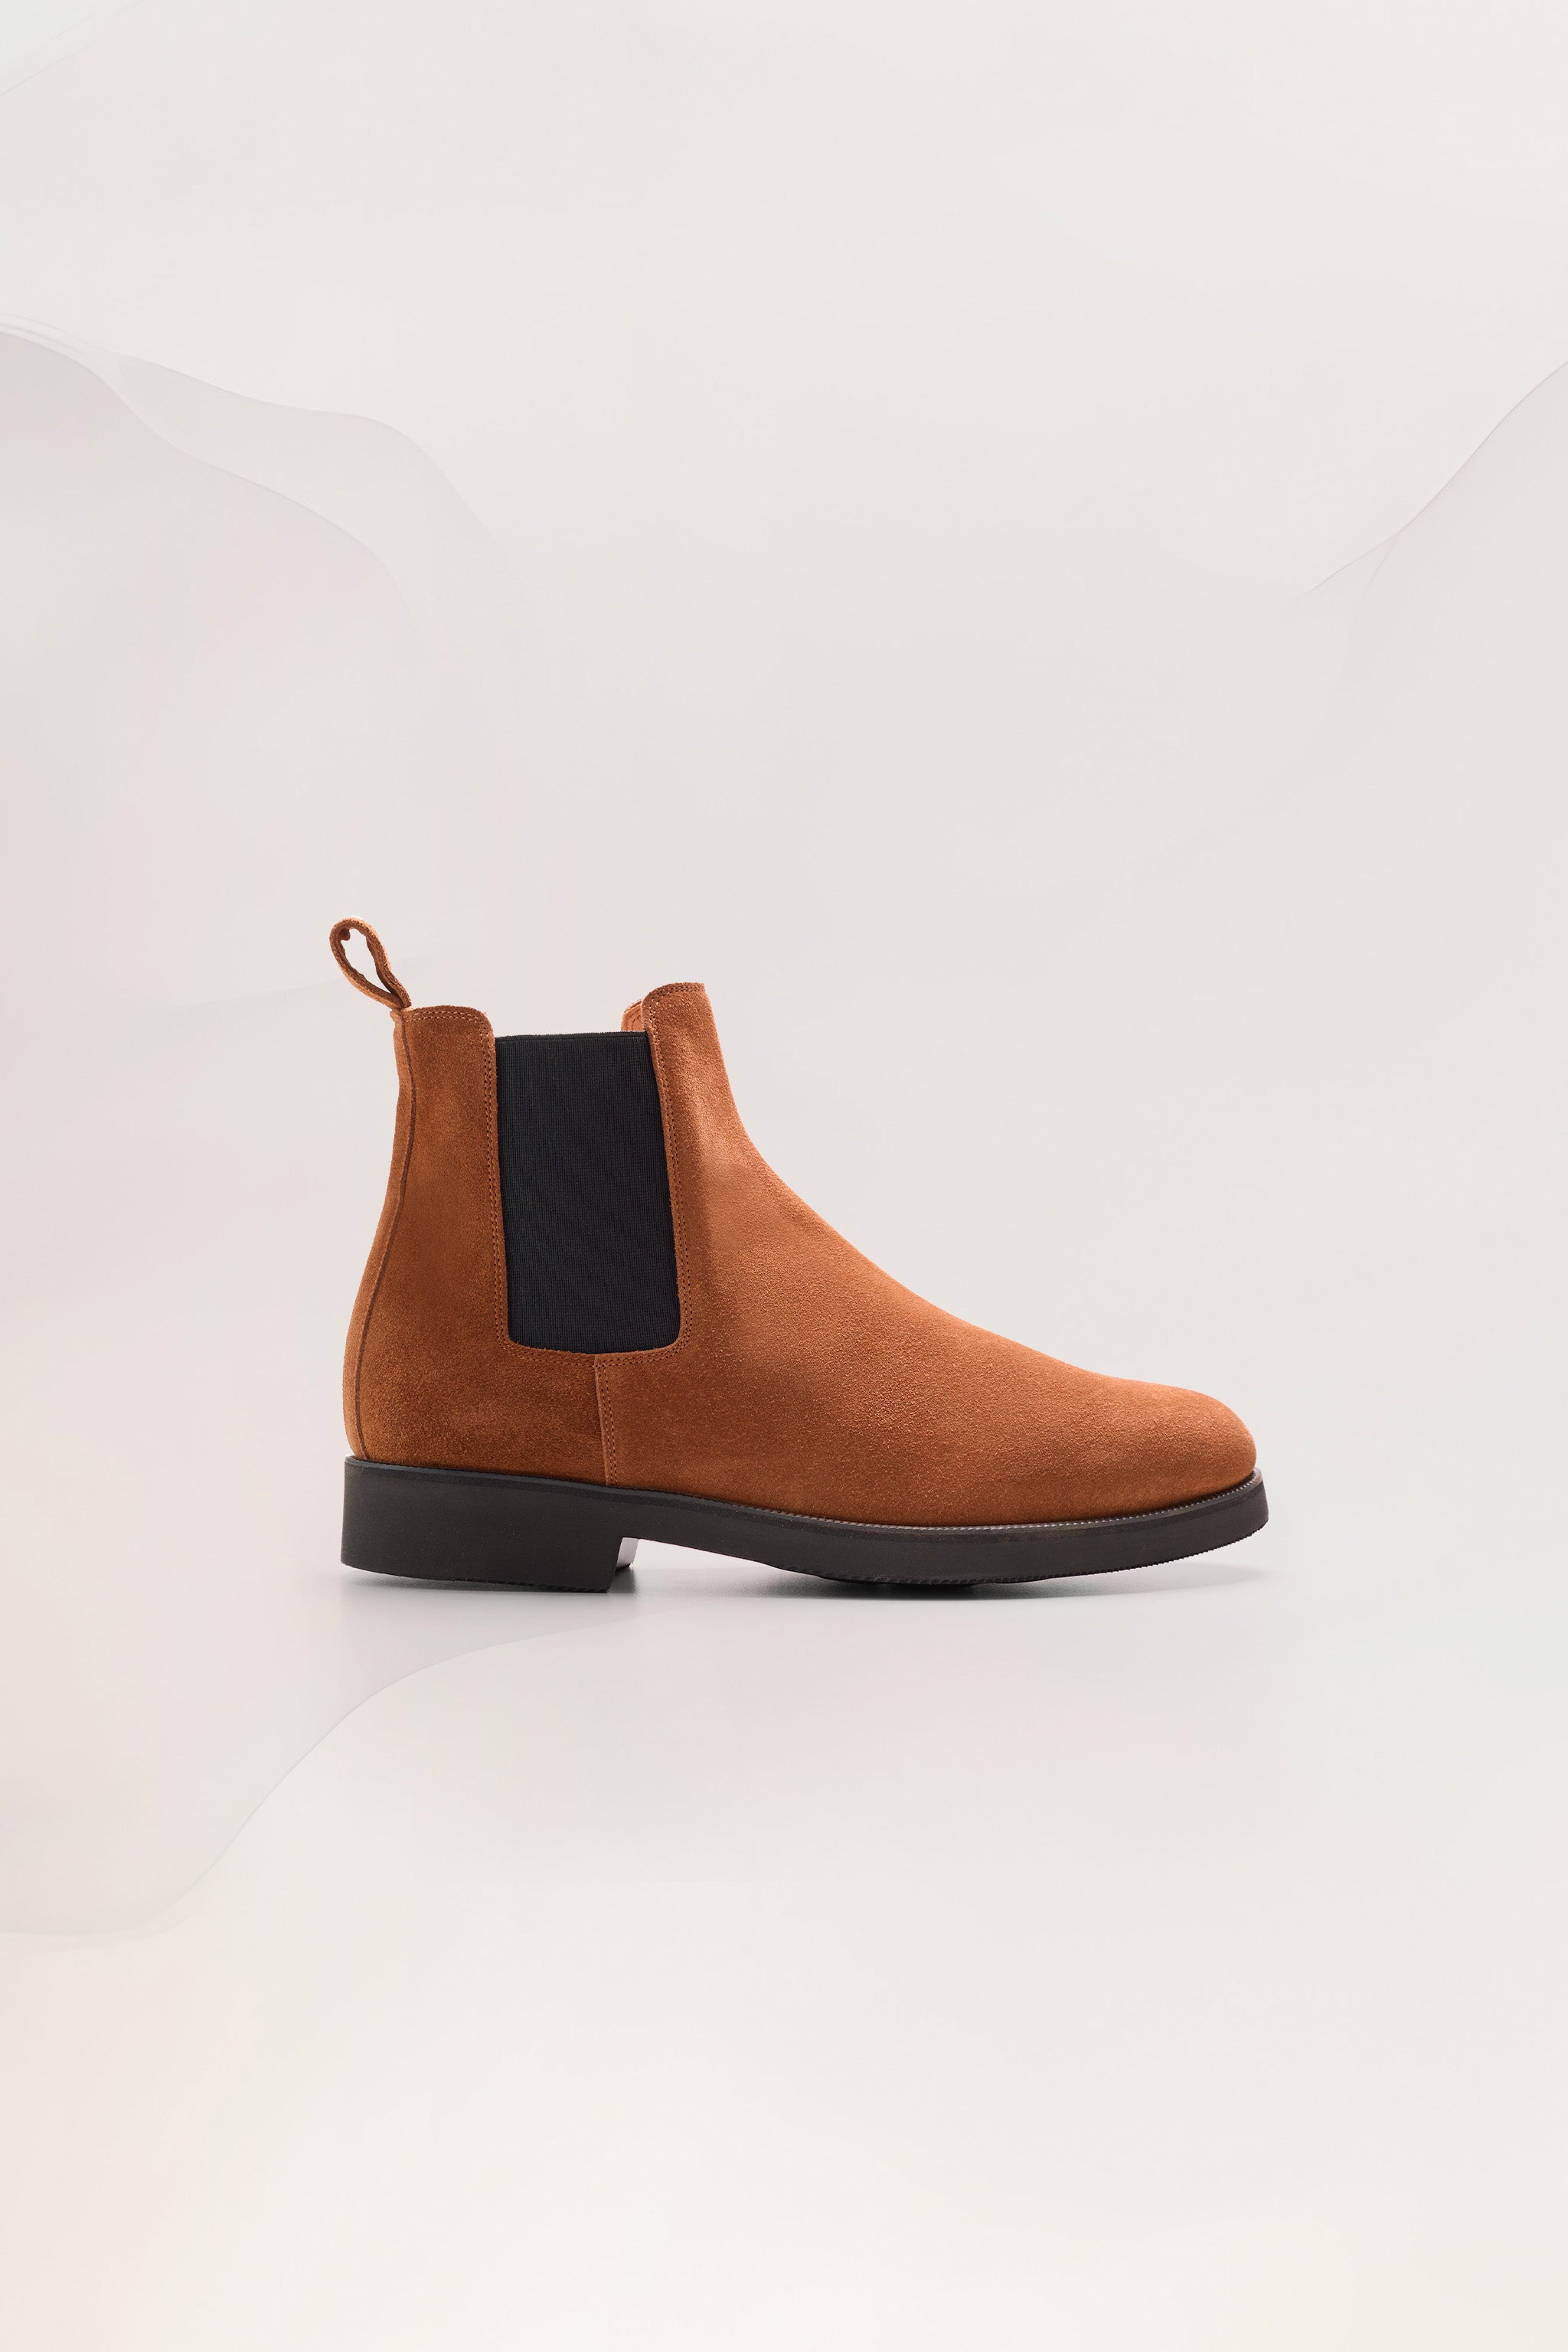 Mens Chelsea Boots in Sienna Suede